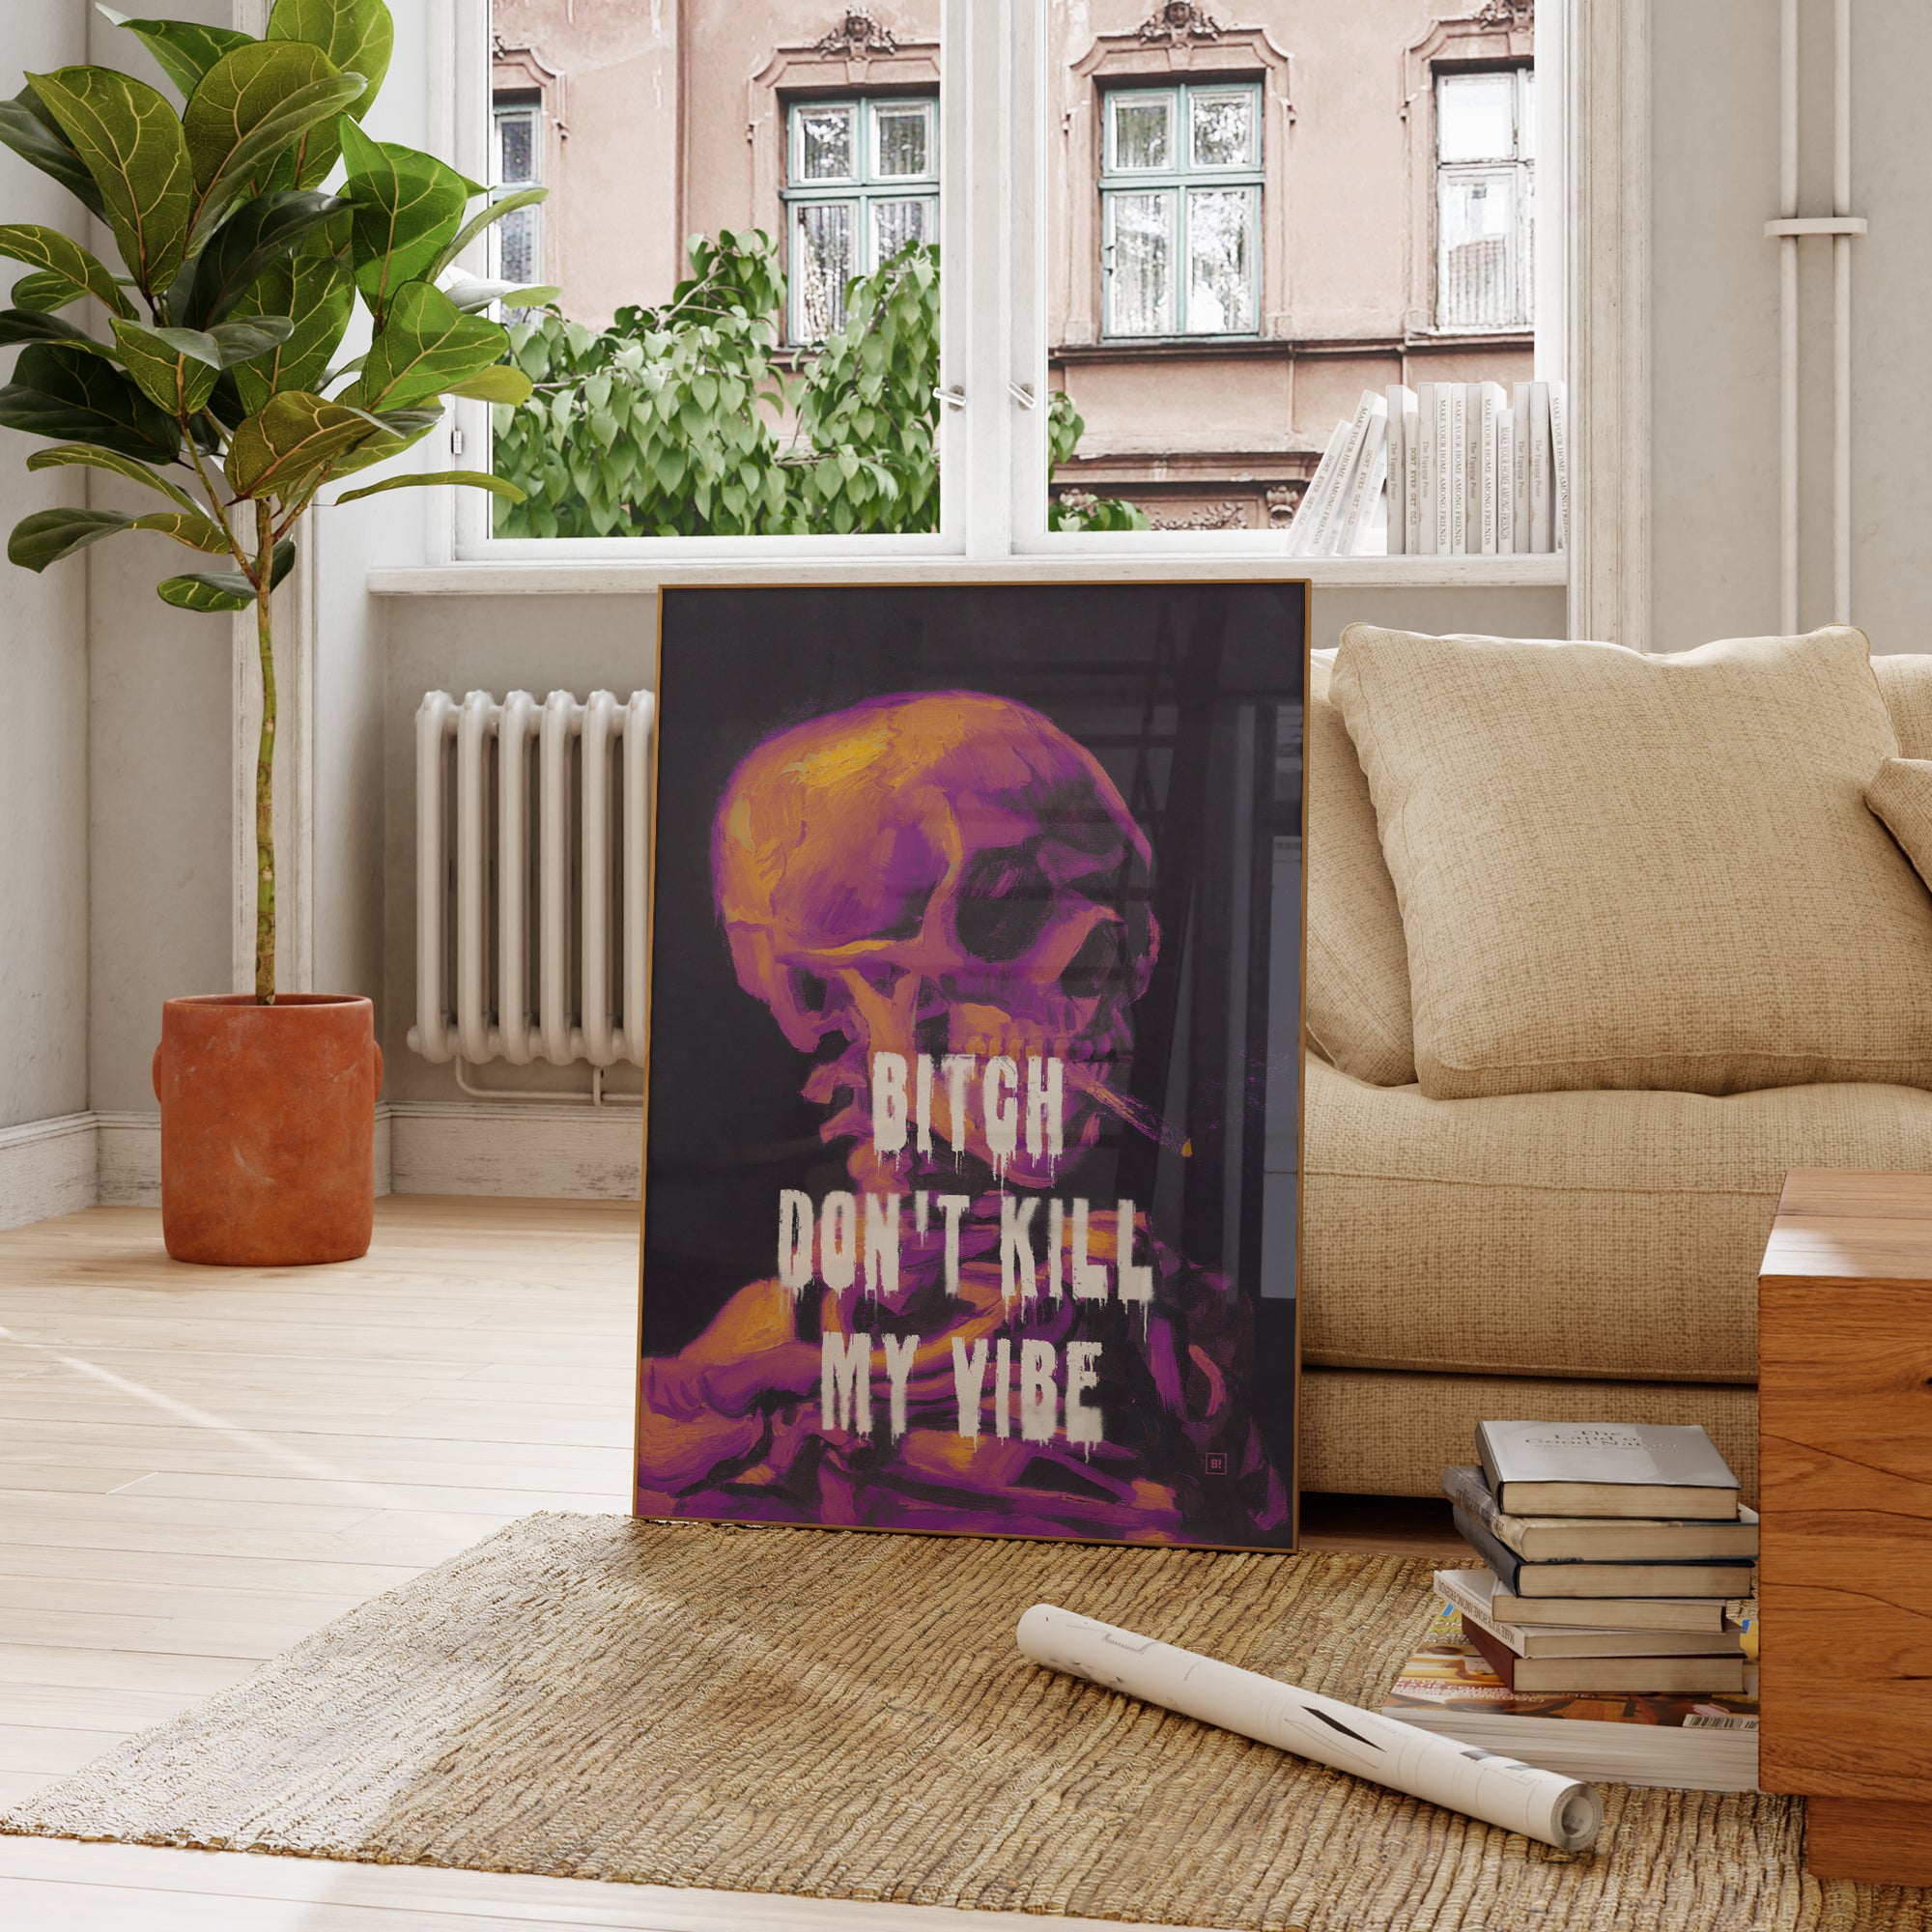 Be inspired by our altered Van Gogh's Bitch Don't Kill My Vibe art print. This artwork has been printed using the giclée process on archival acid-free paper and is presented in a french living room that captures its timeless beauty in every detail.